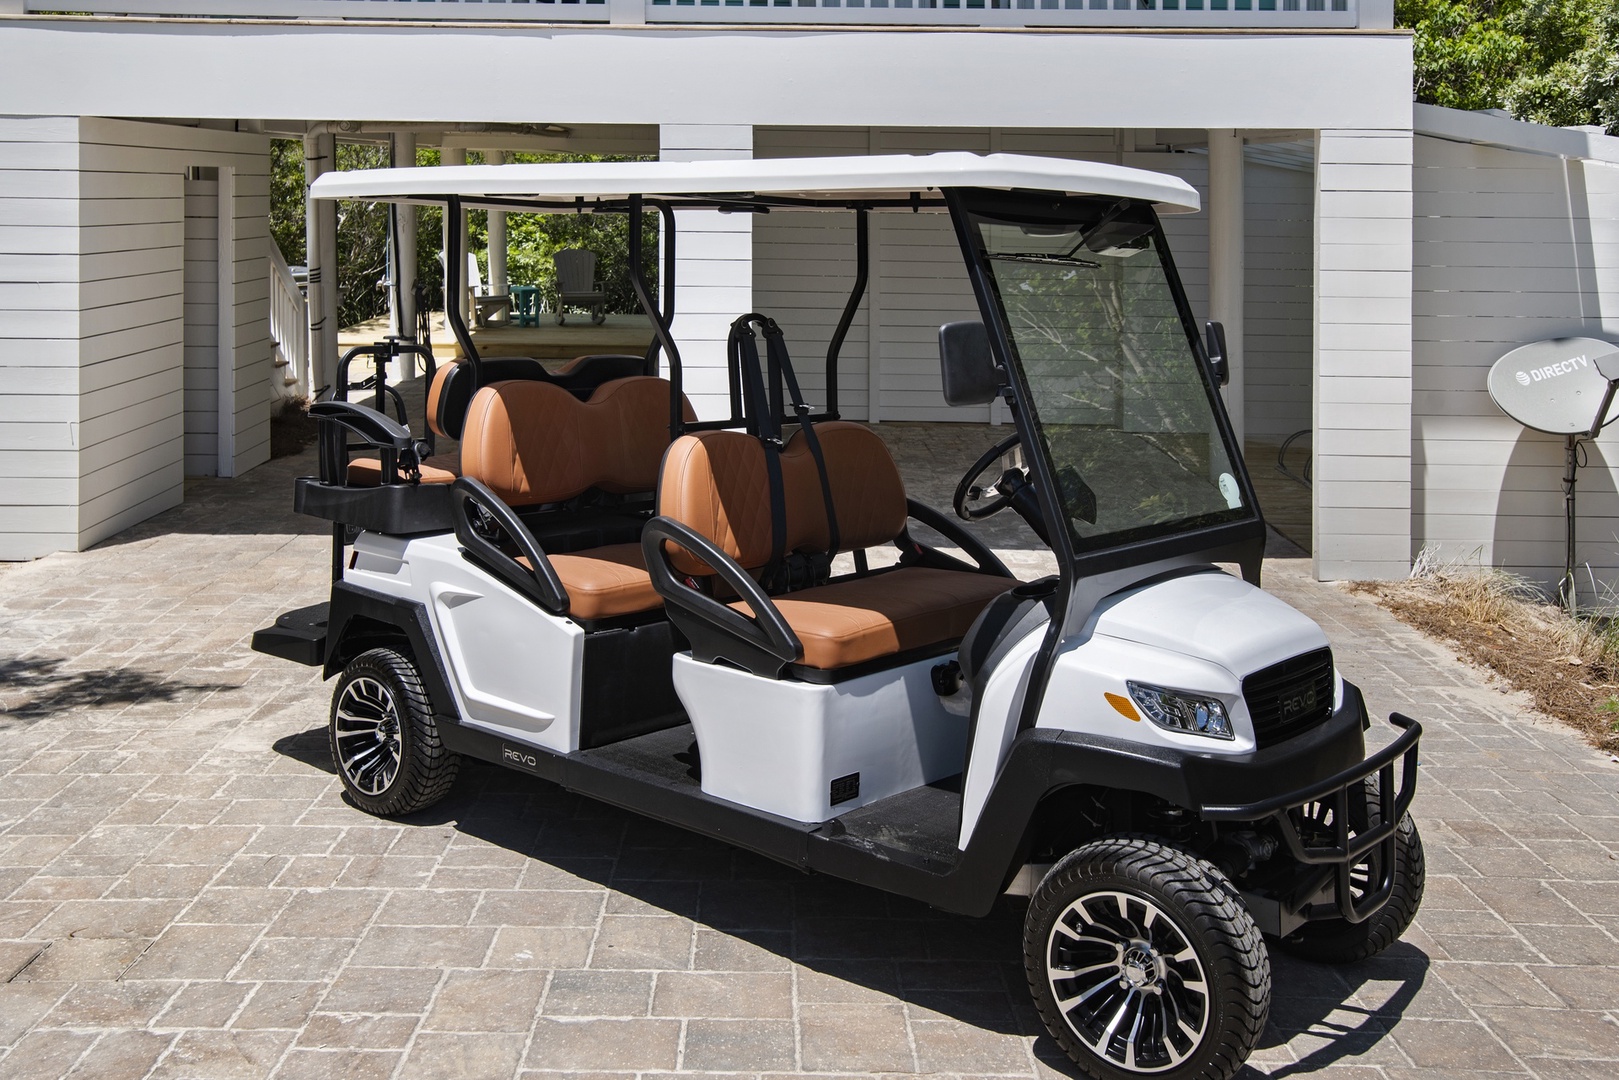 A 6-Person Golf Cart is included!